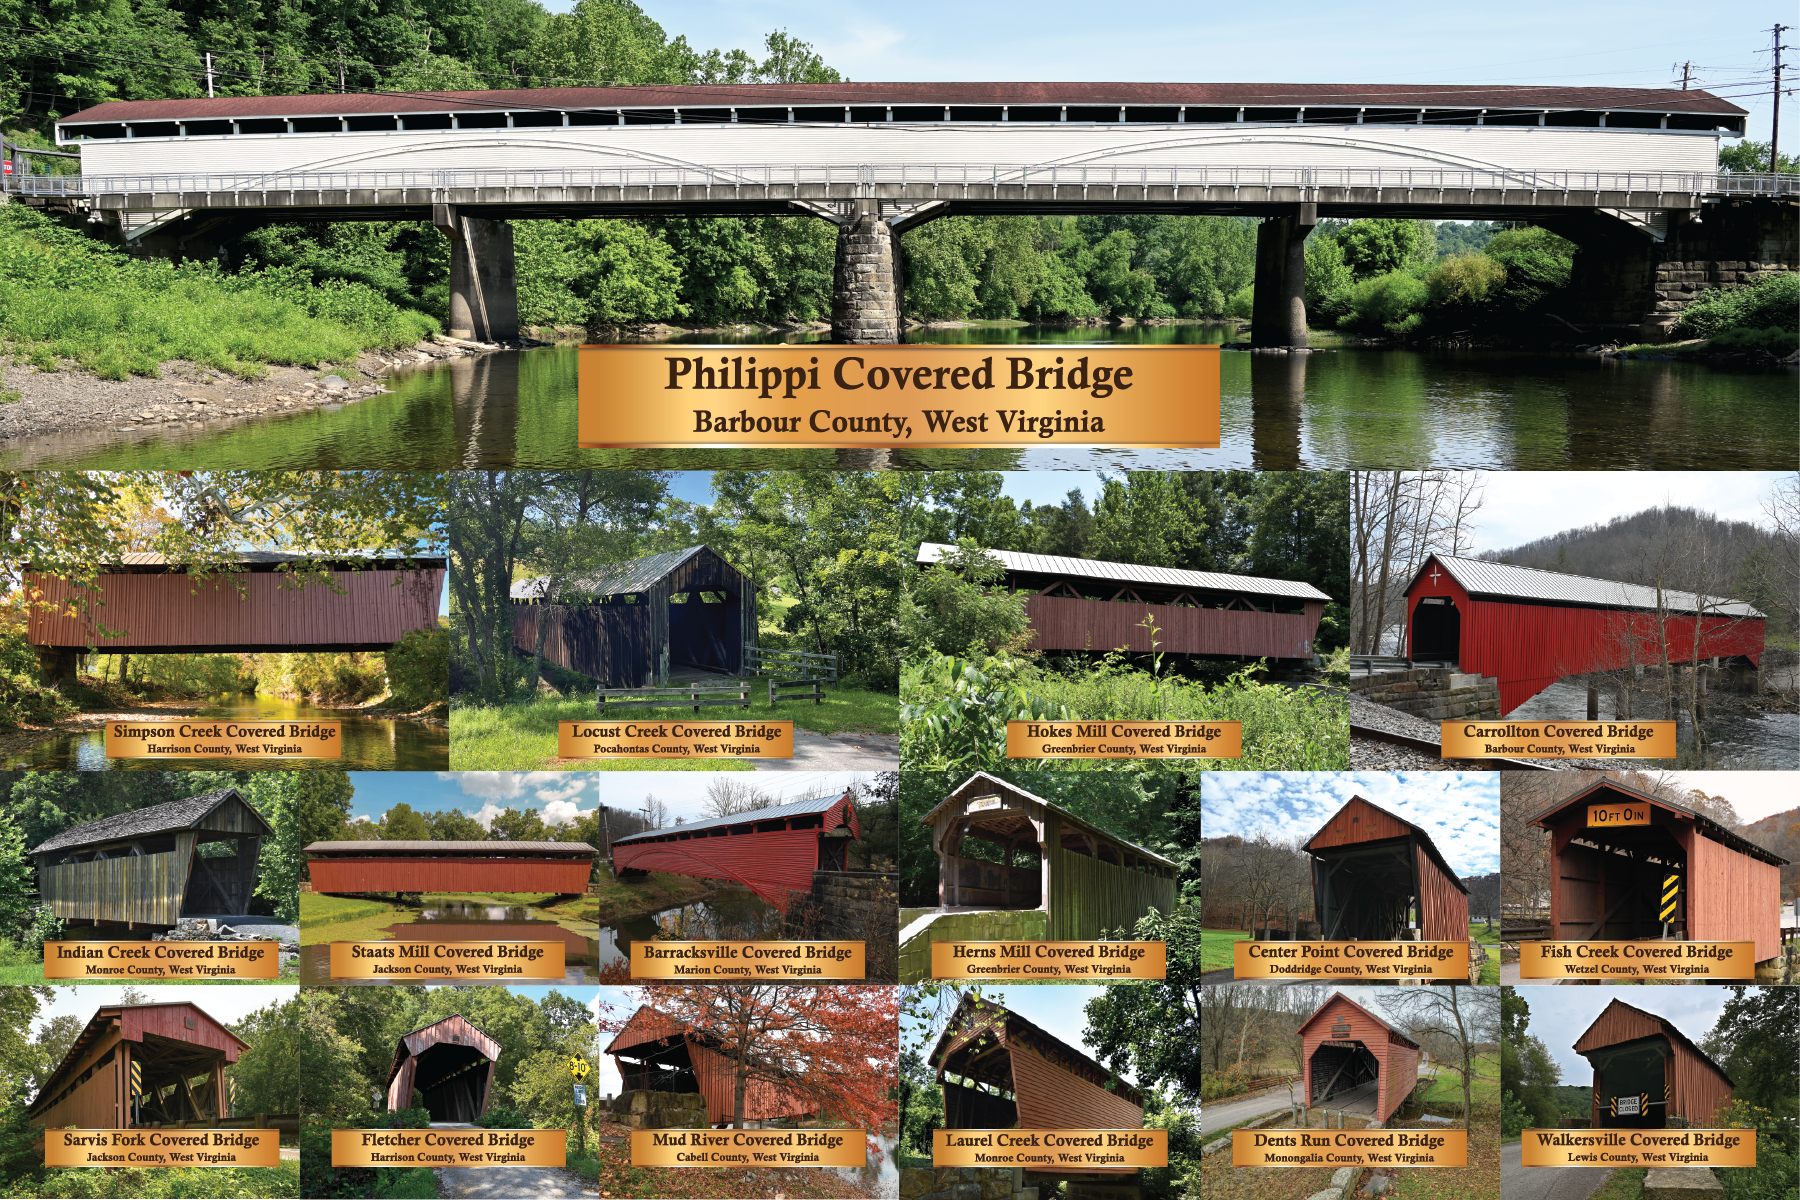 Free Poster Of W.Va. Covered Bridges Available Through Department Of Transportation